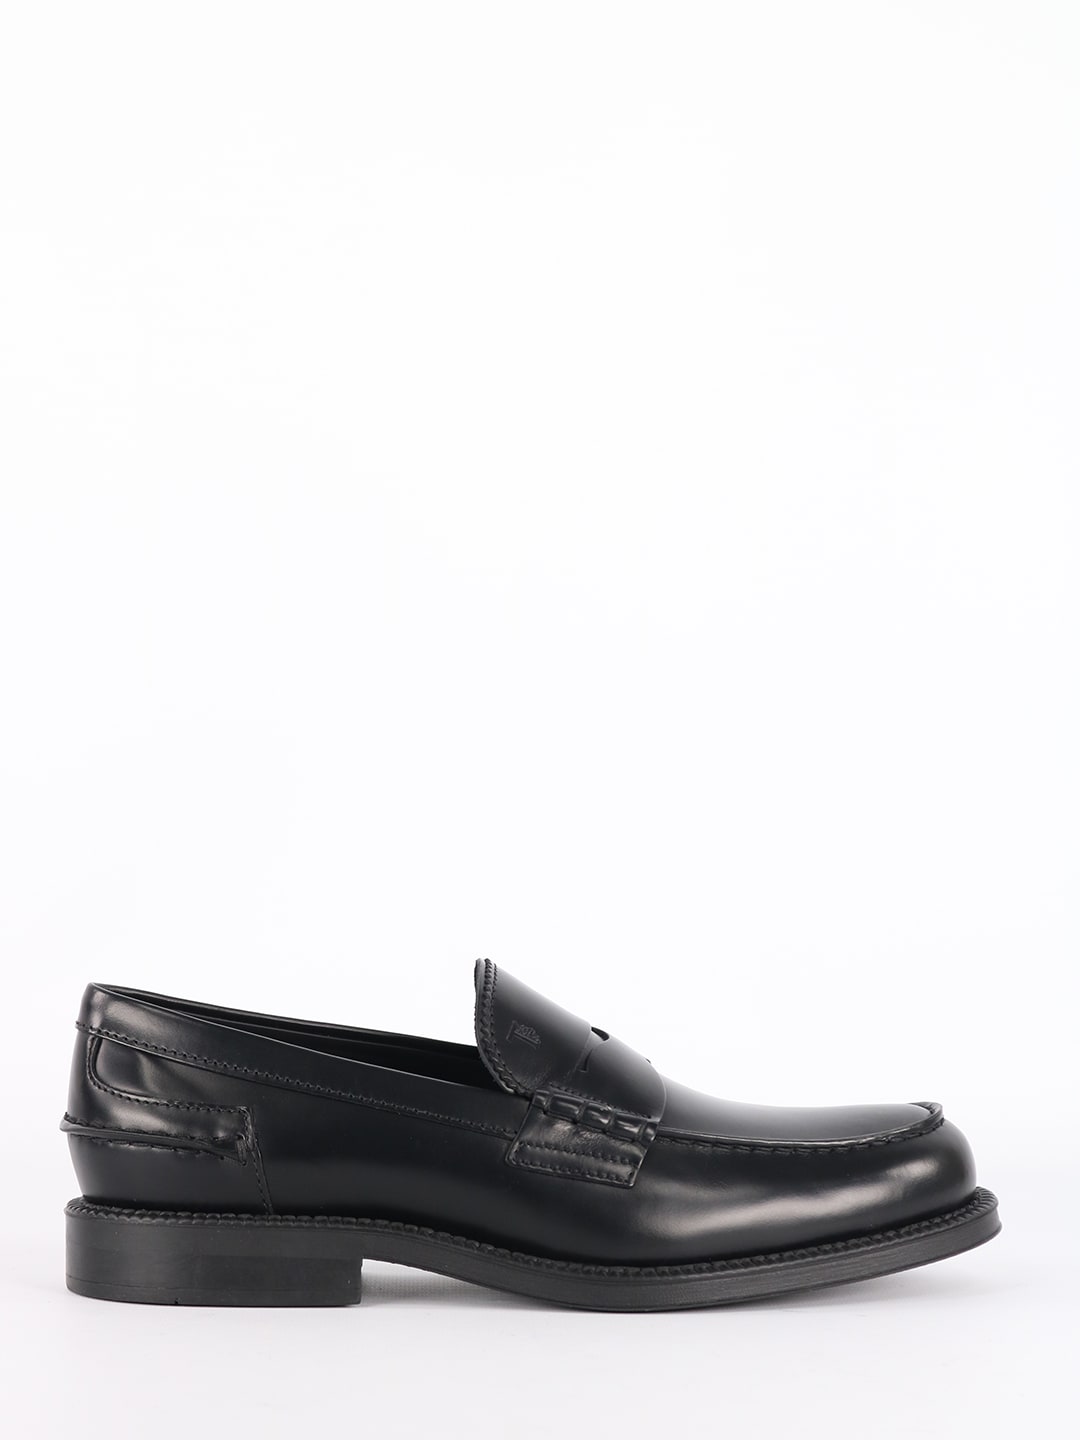 Tods Black Leather Moccasin